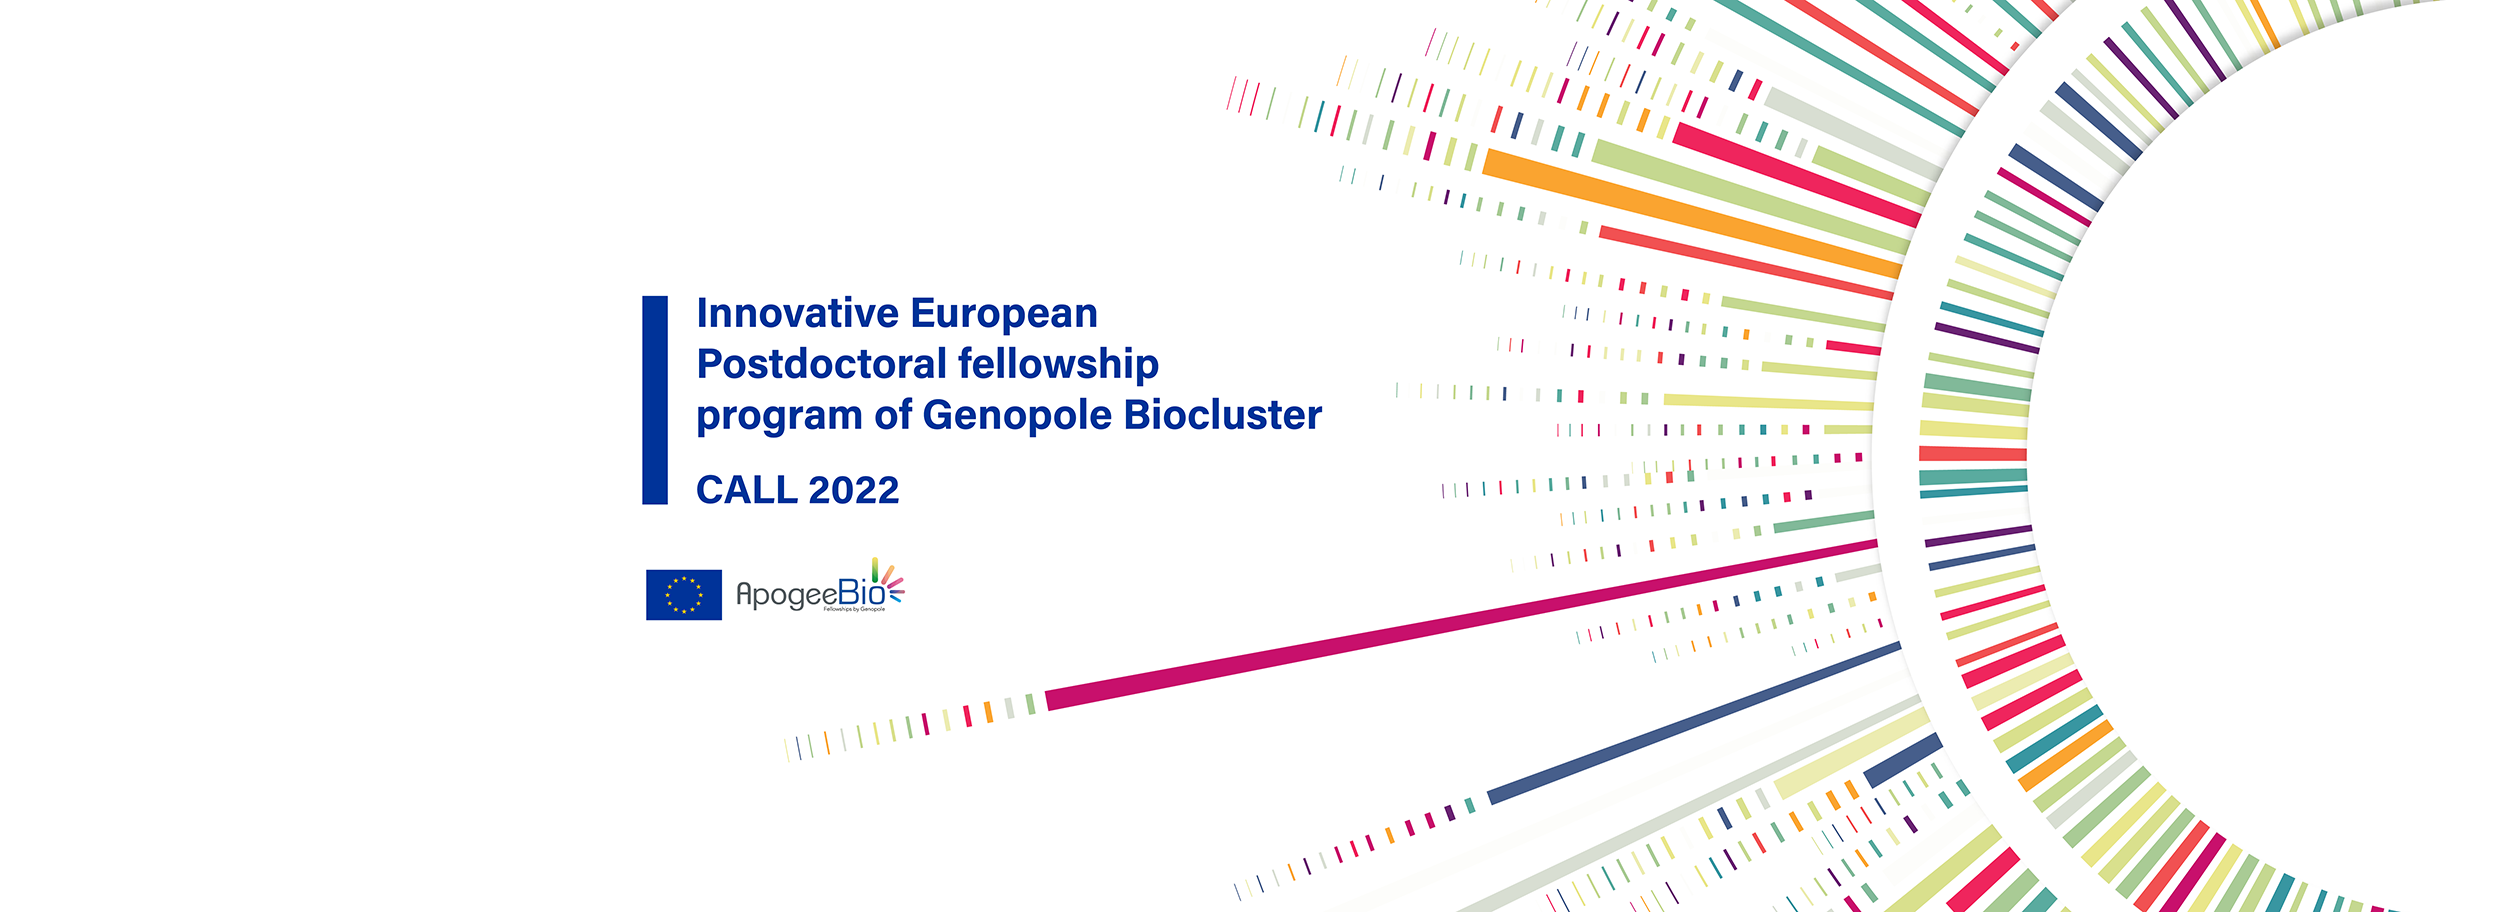 Call 2022 – 12 postdoctoral positions in Genopole biocluster